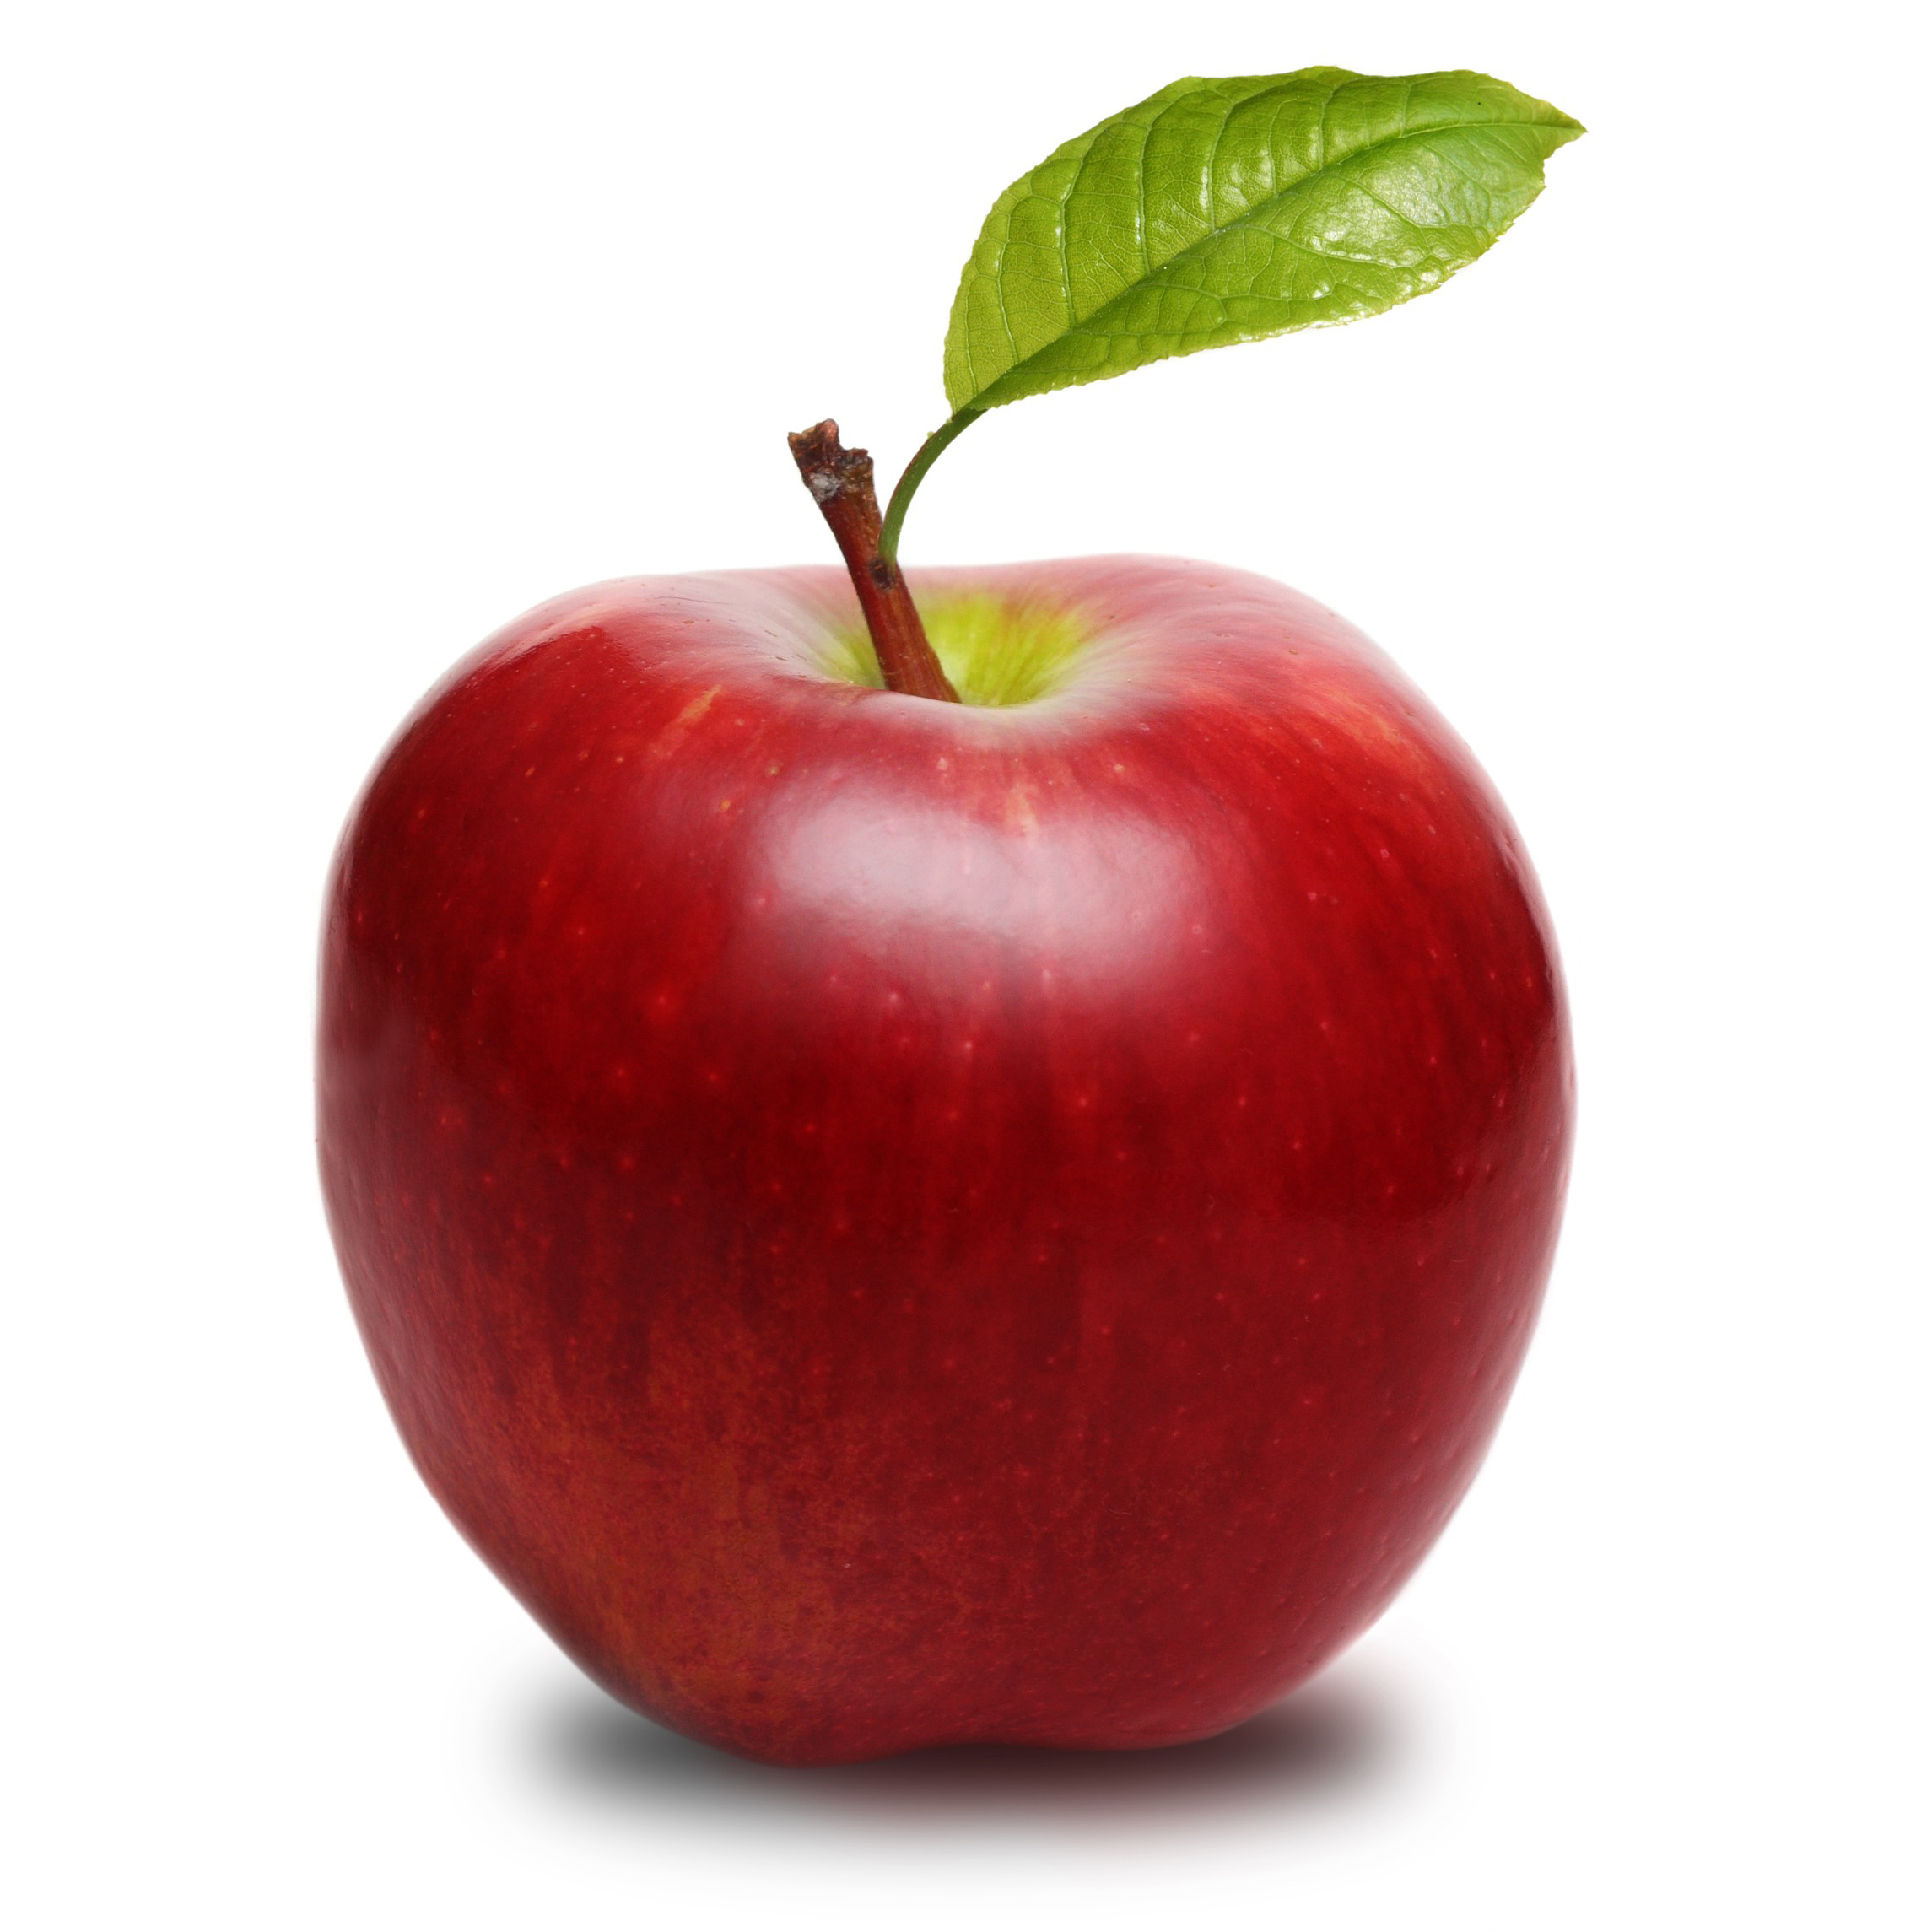 Apple: Red delicous Golden & Granny Smith